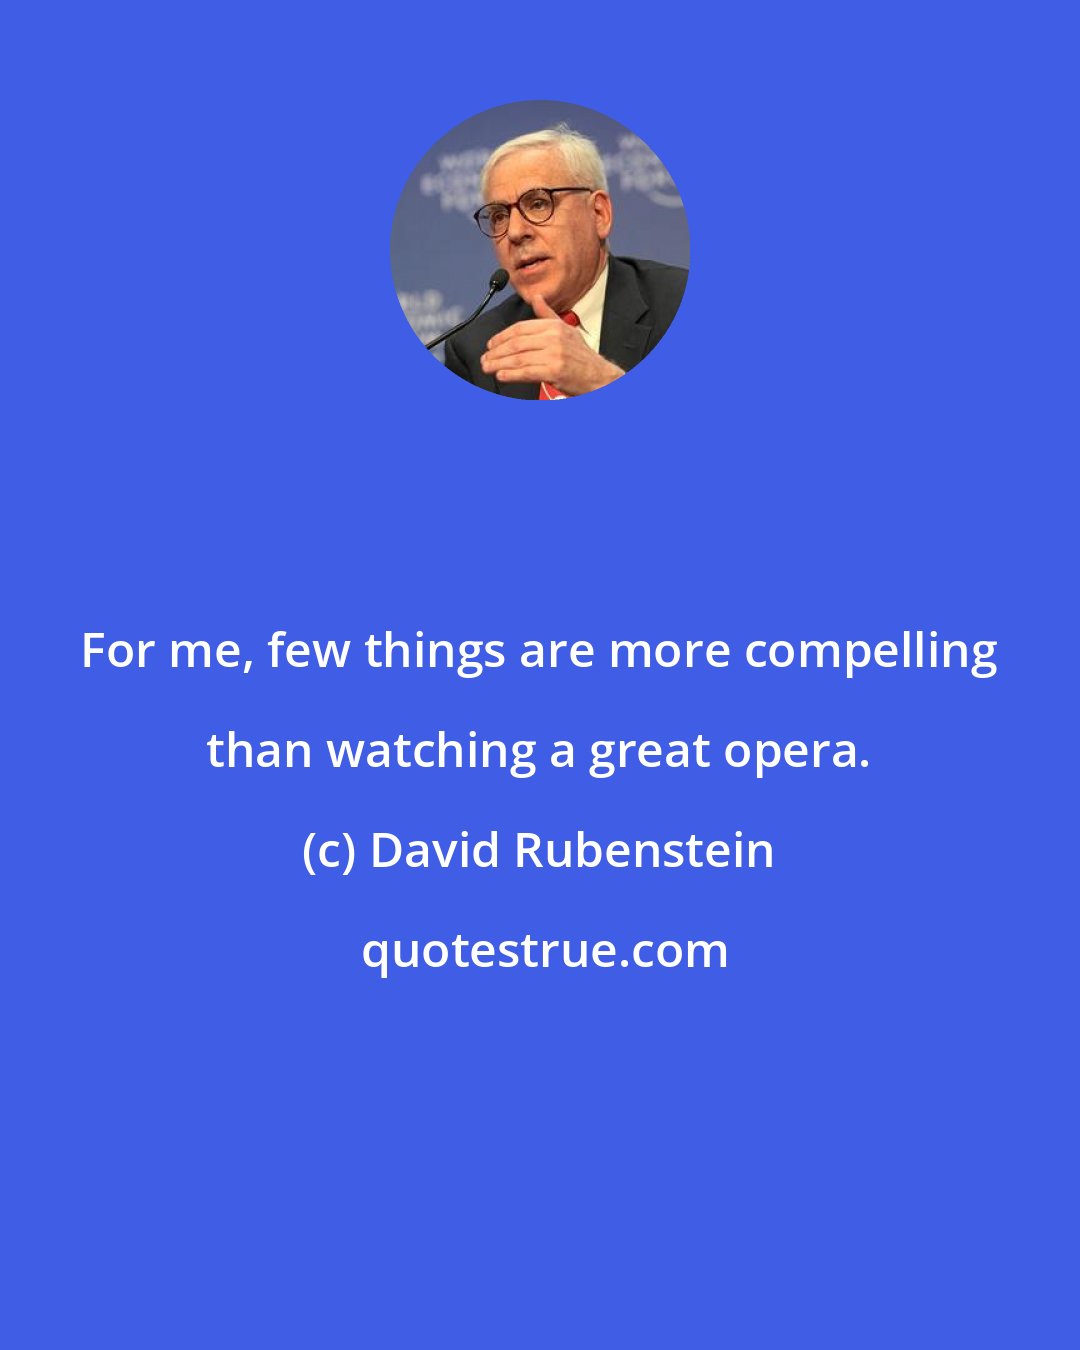 David Rubenstein: For me, few things are more compelling than watching a great opera.